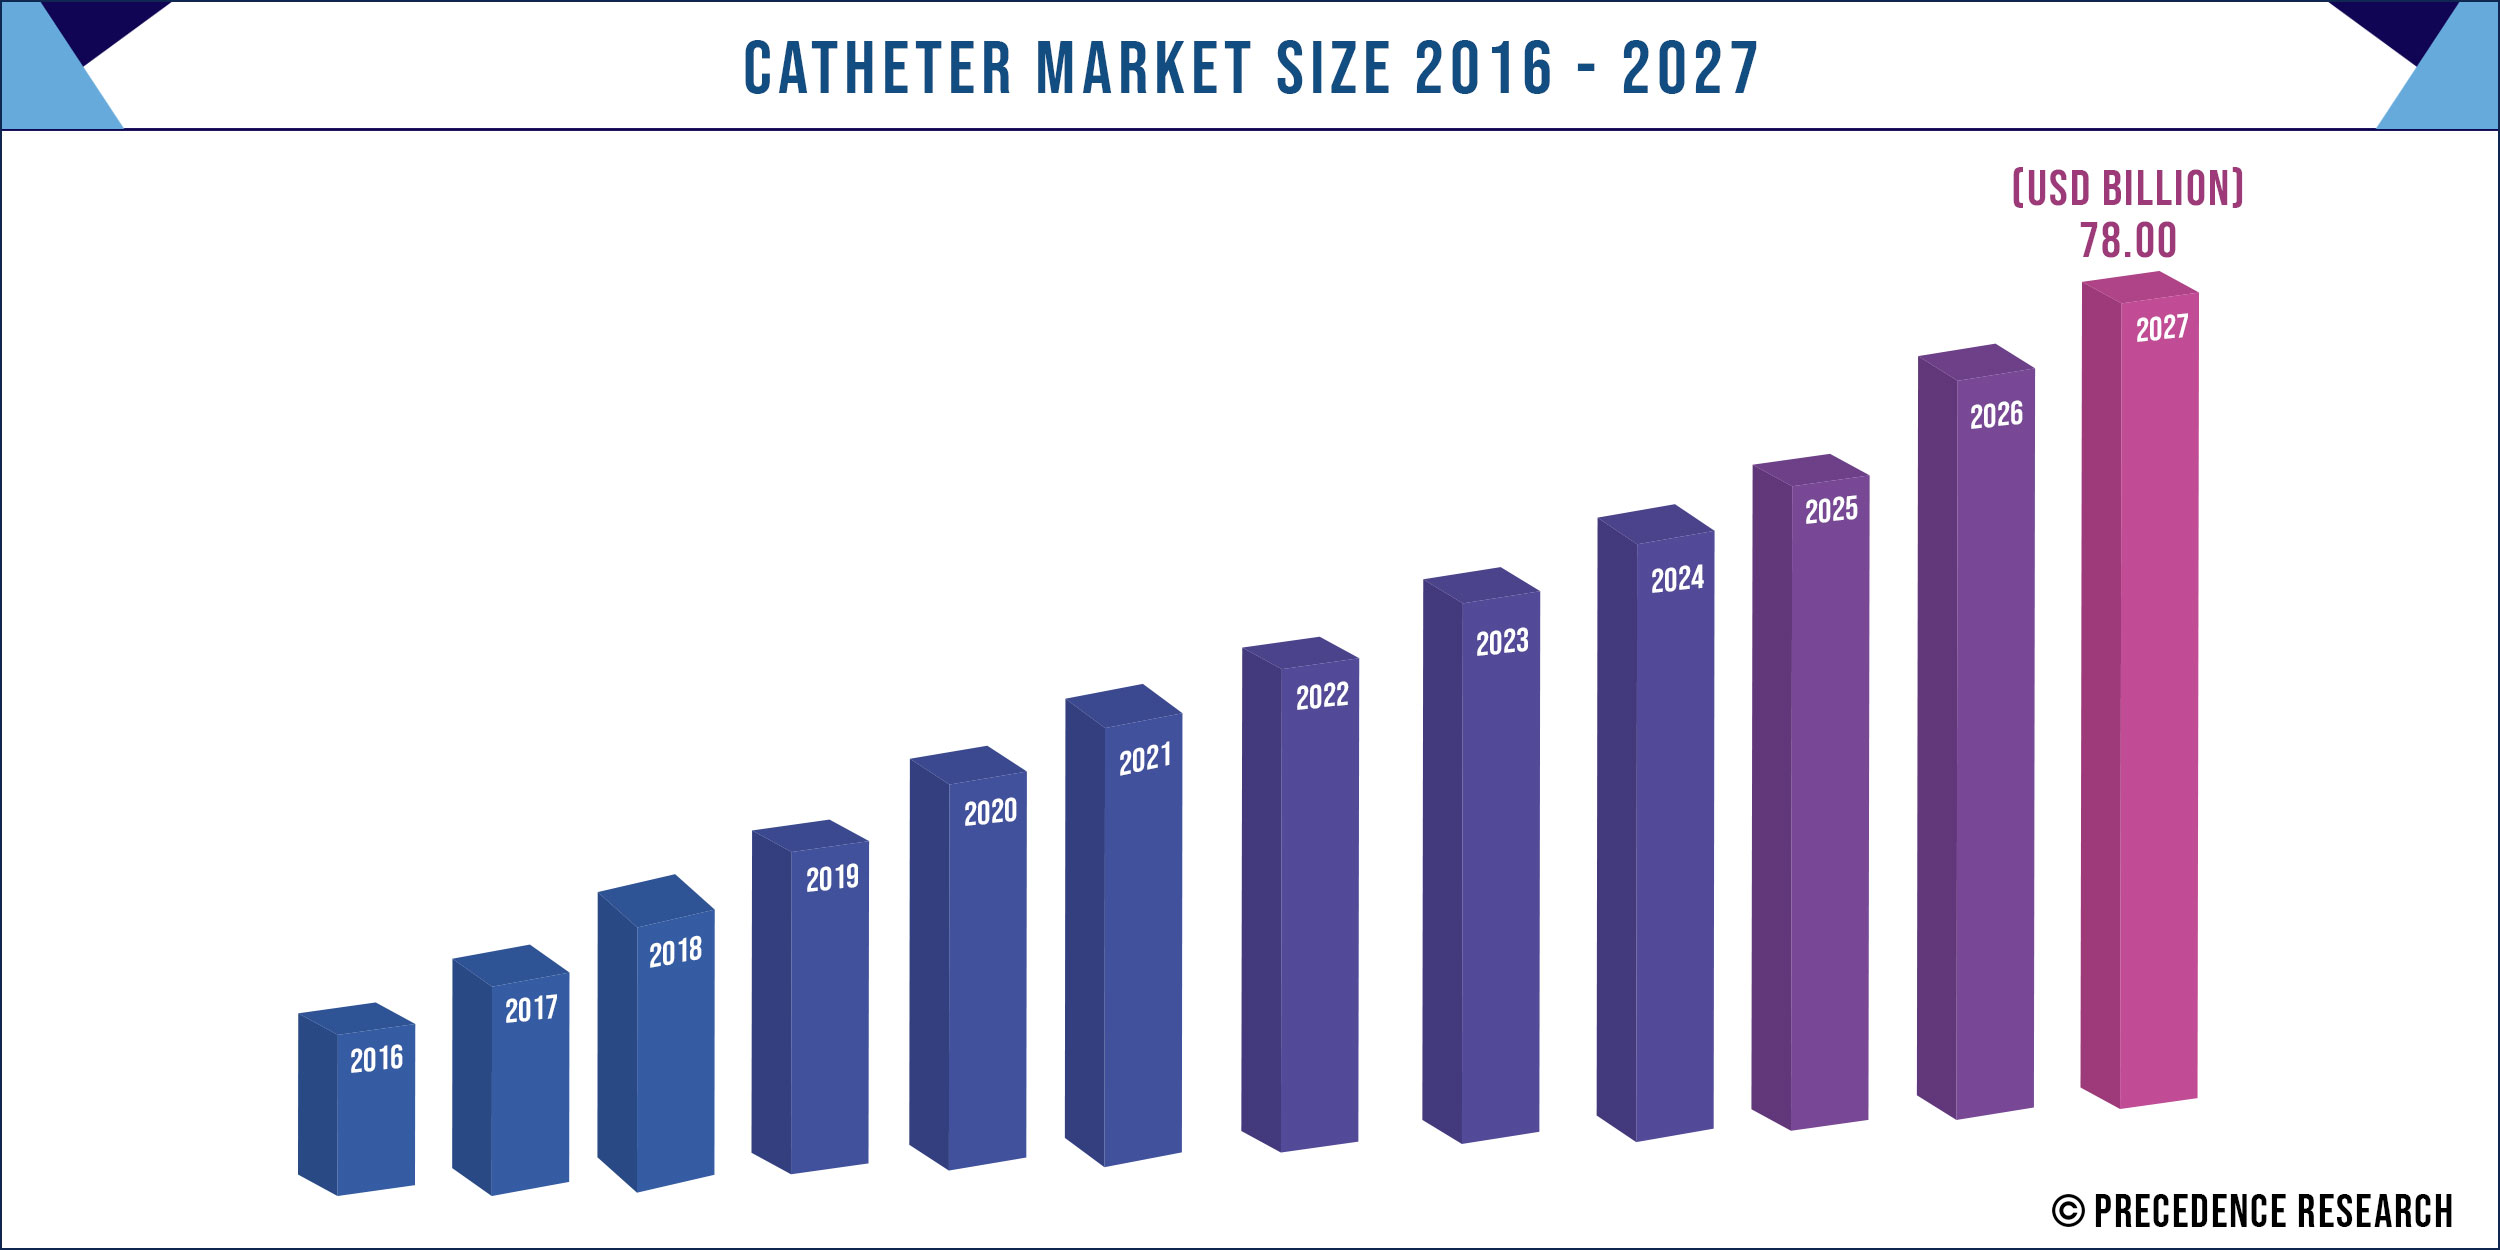 Catheter Market Size is Forecasted to Reach US$ 78 Billion by 2027